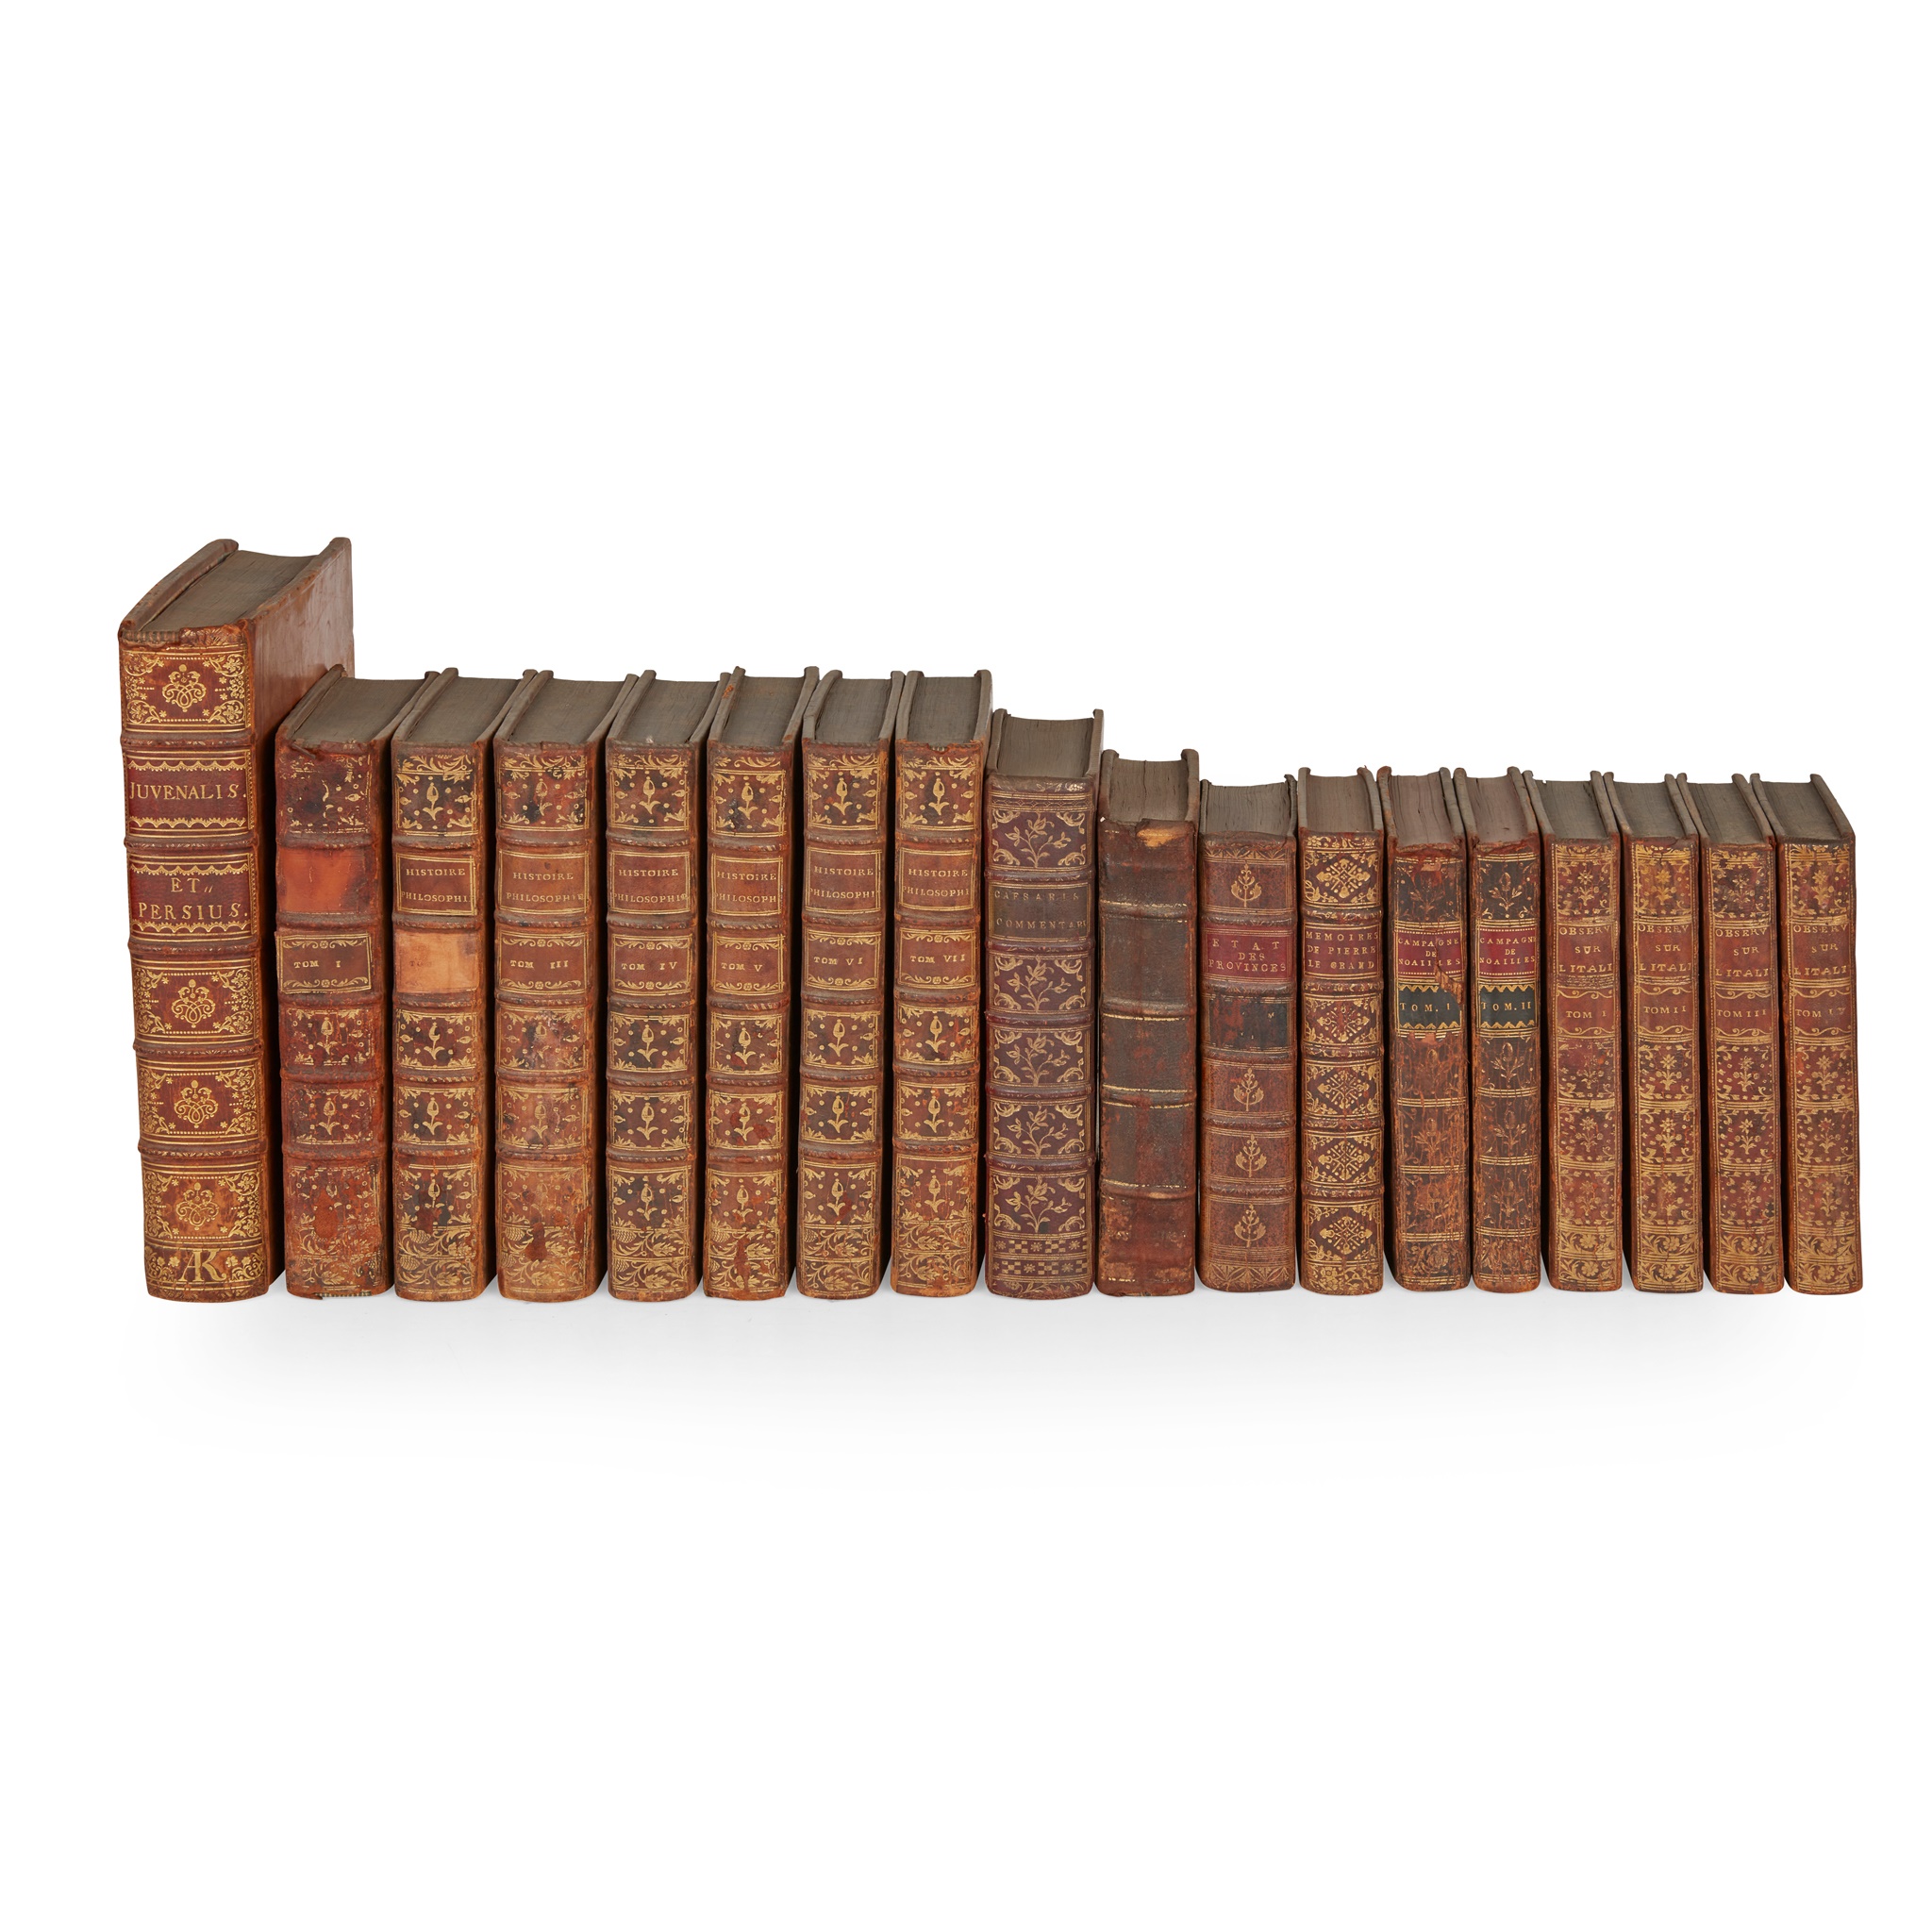 French and Latin works 18 volumes, comprising